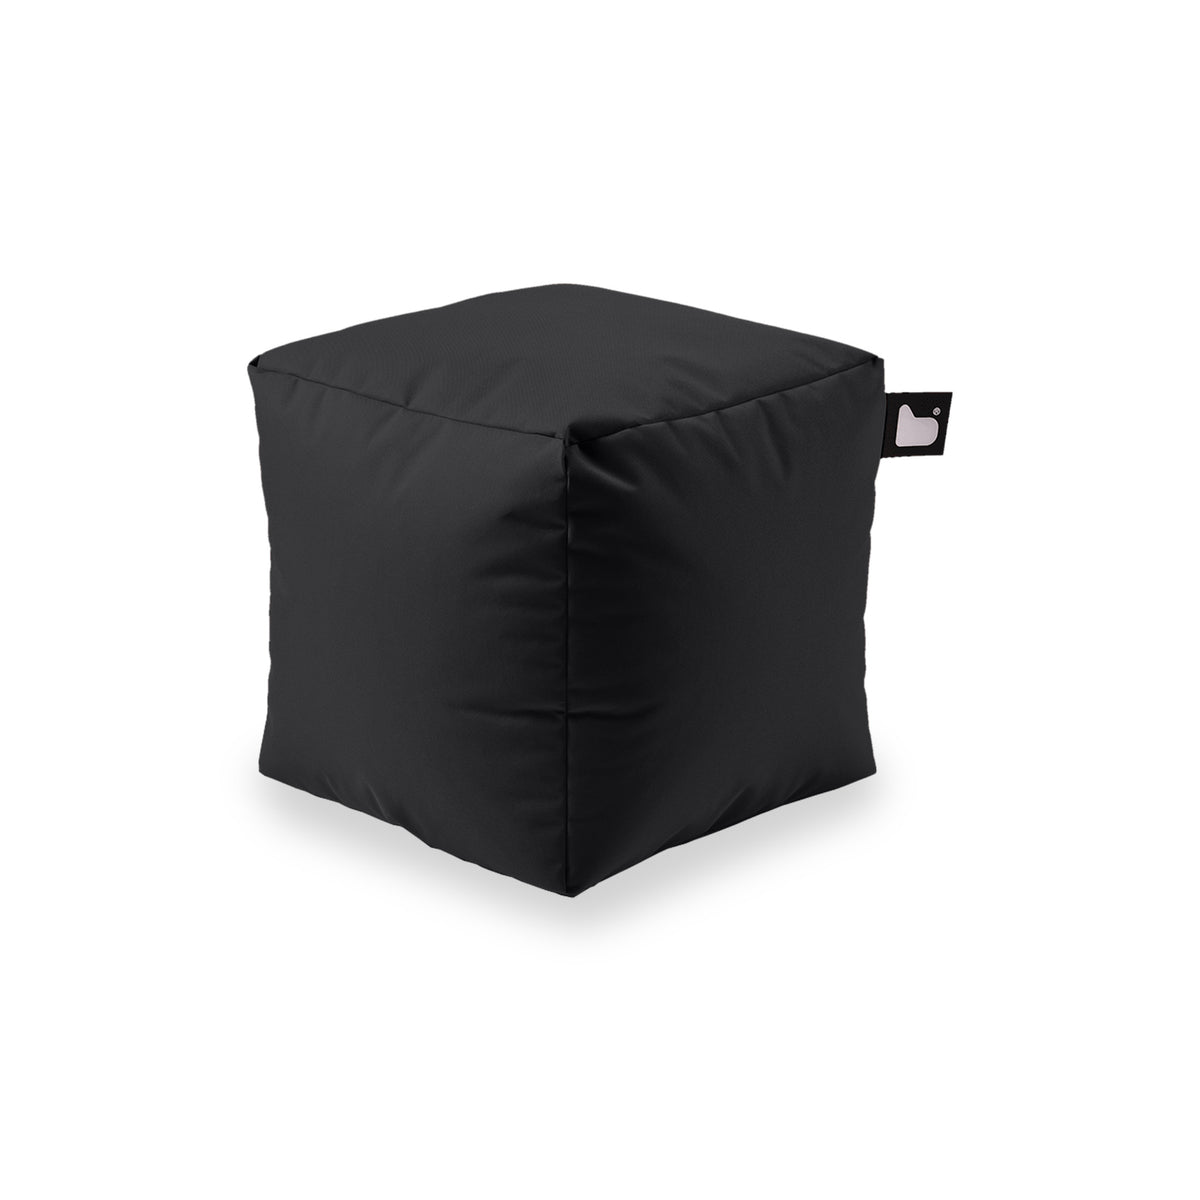 Outdoor B Box in Black from Roseland Furniture